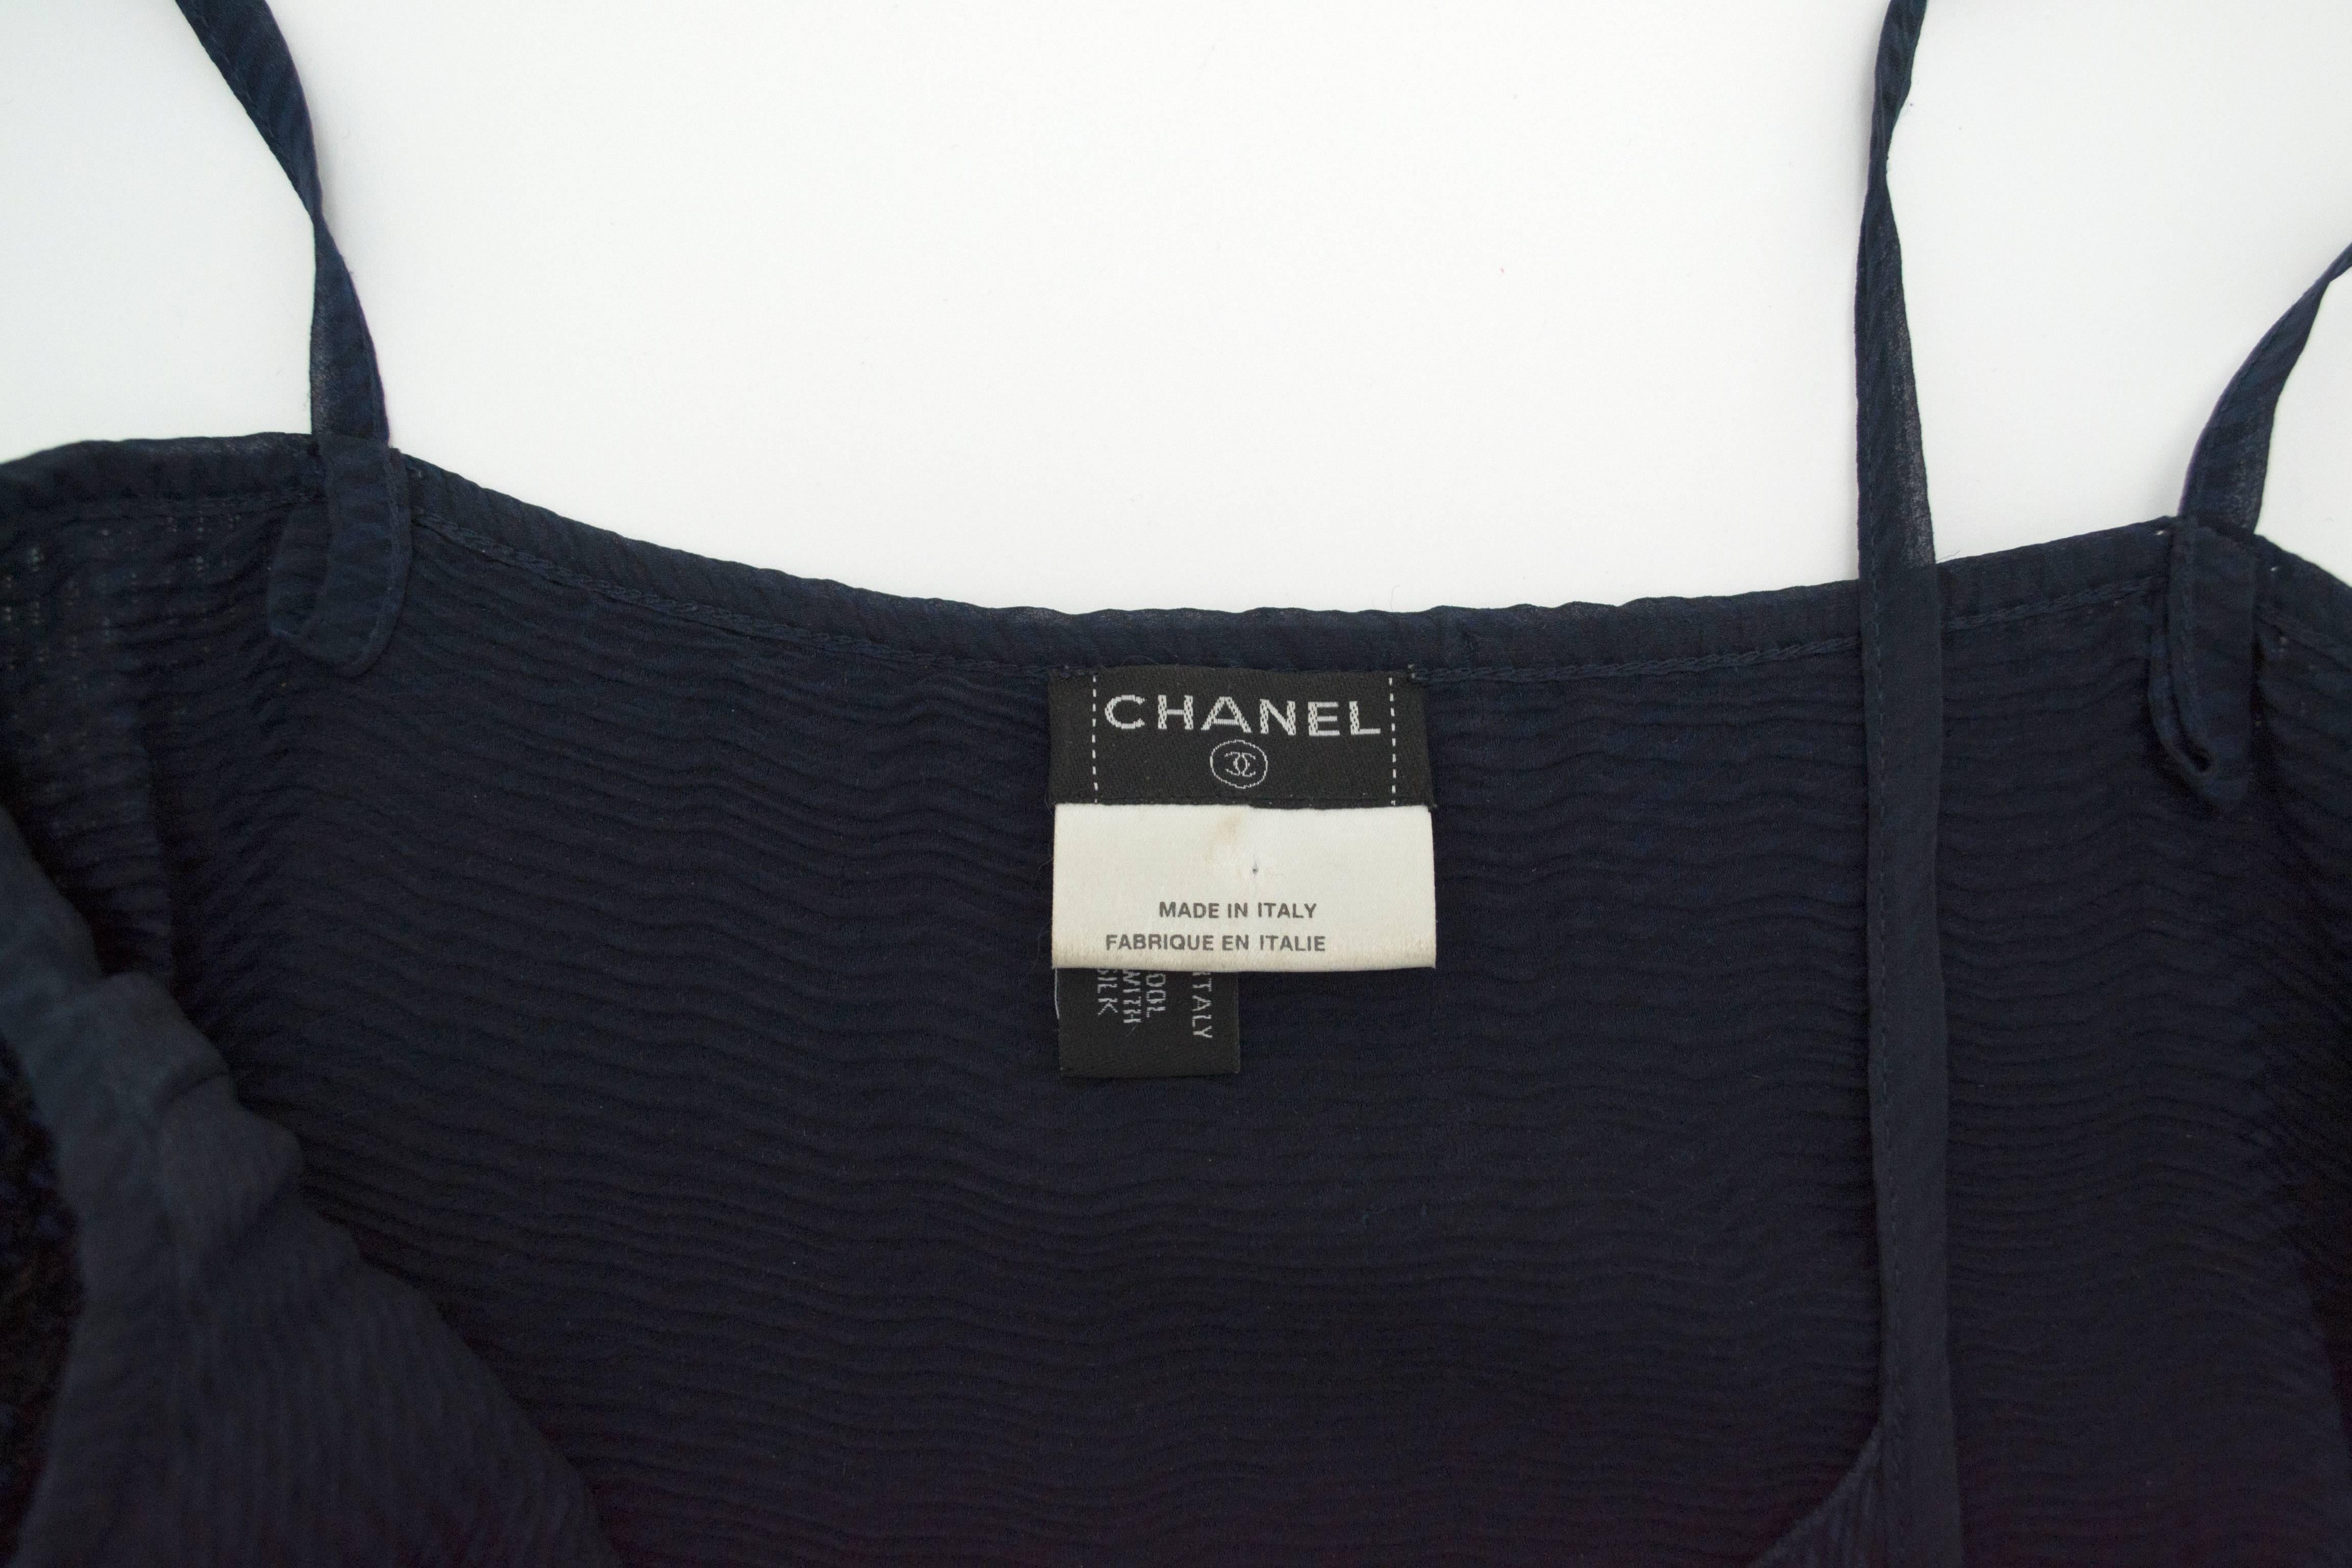 Chanel navy and black 100% wool boucle top lined in 100% navy silk. Trimmed in navy silk edging. Zips at the side. From the 2002 collection. Previously worn in very good condition with no major signs of wear. 